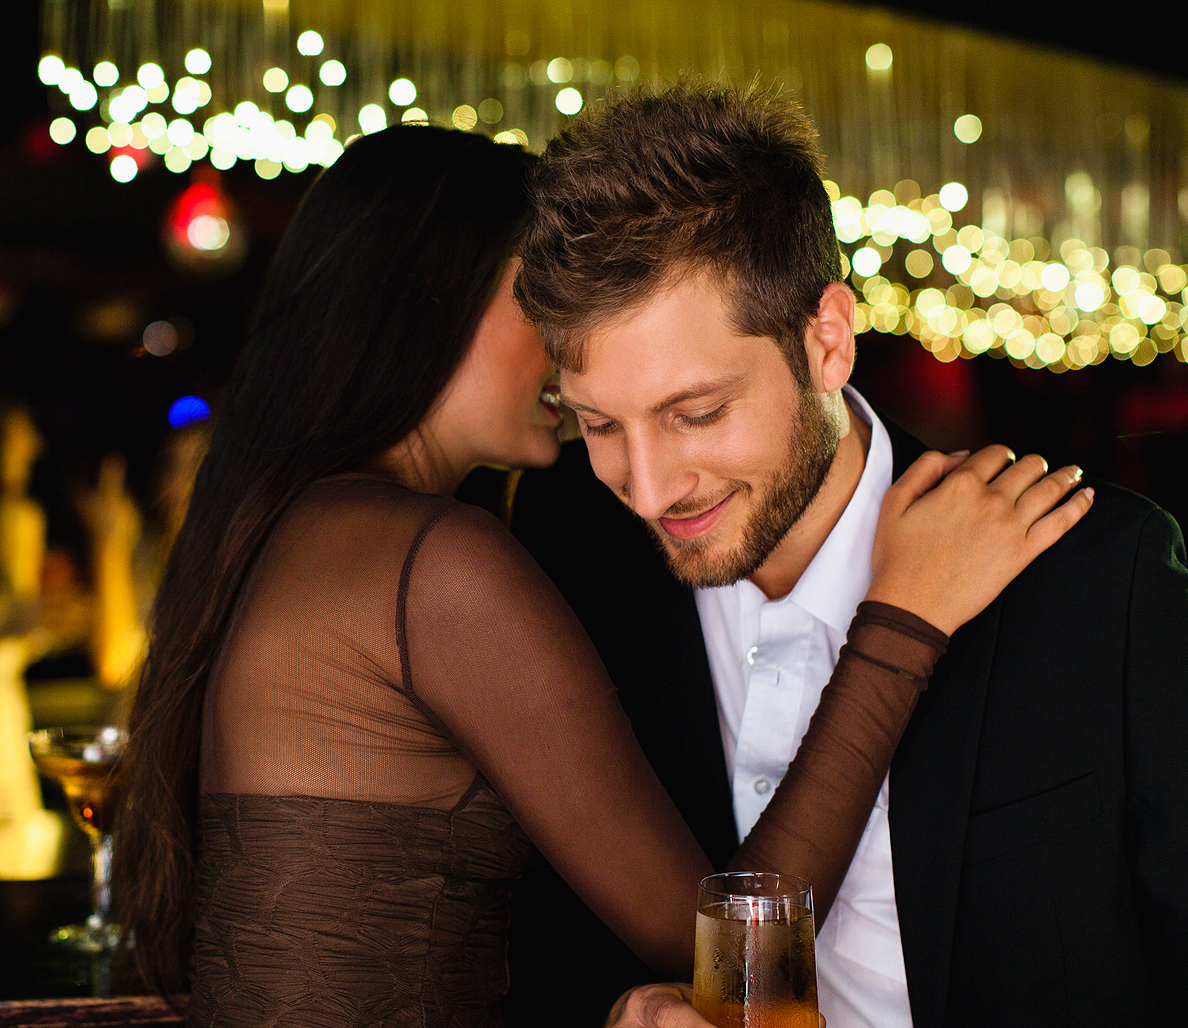 The classy mans guide to dating an older woman